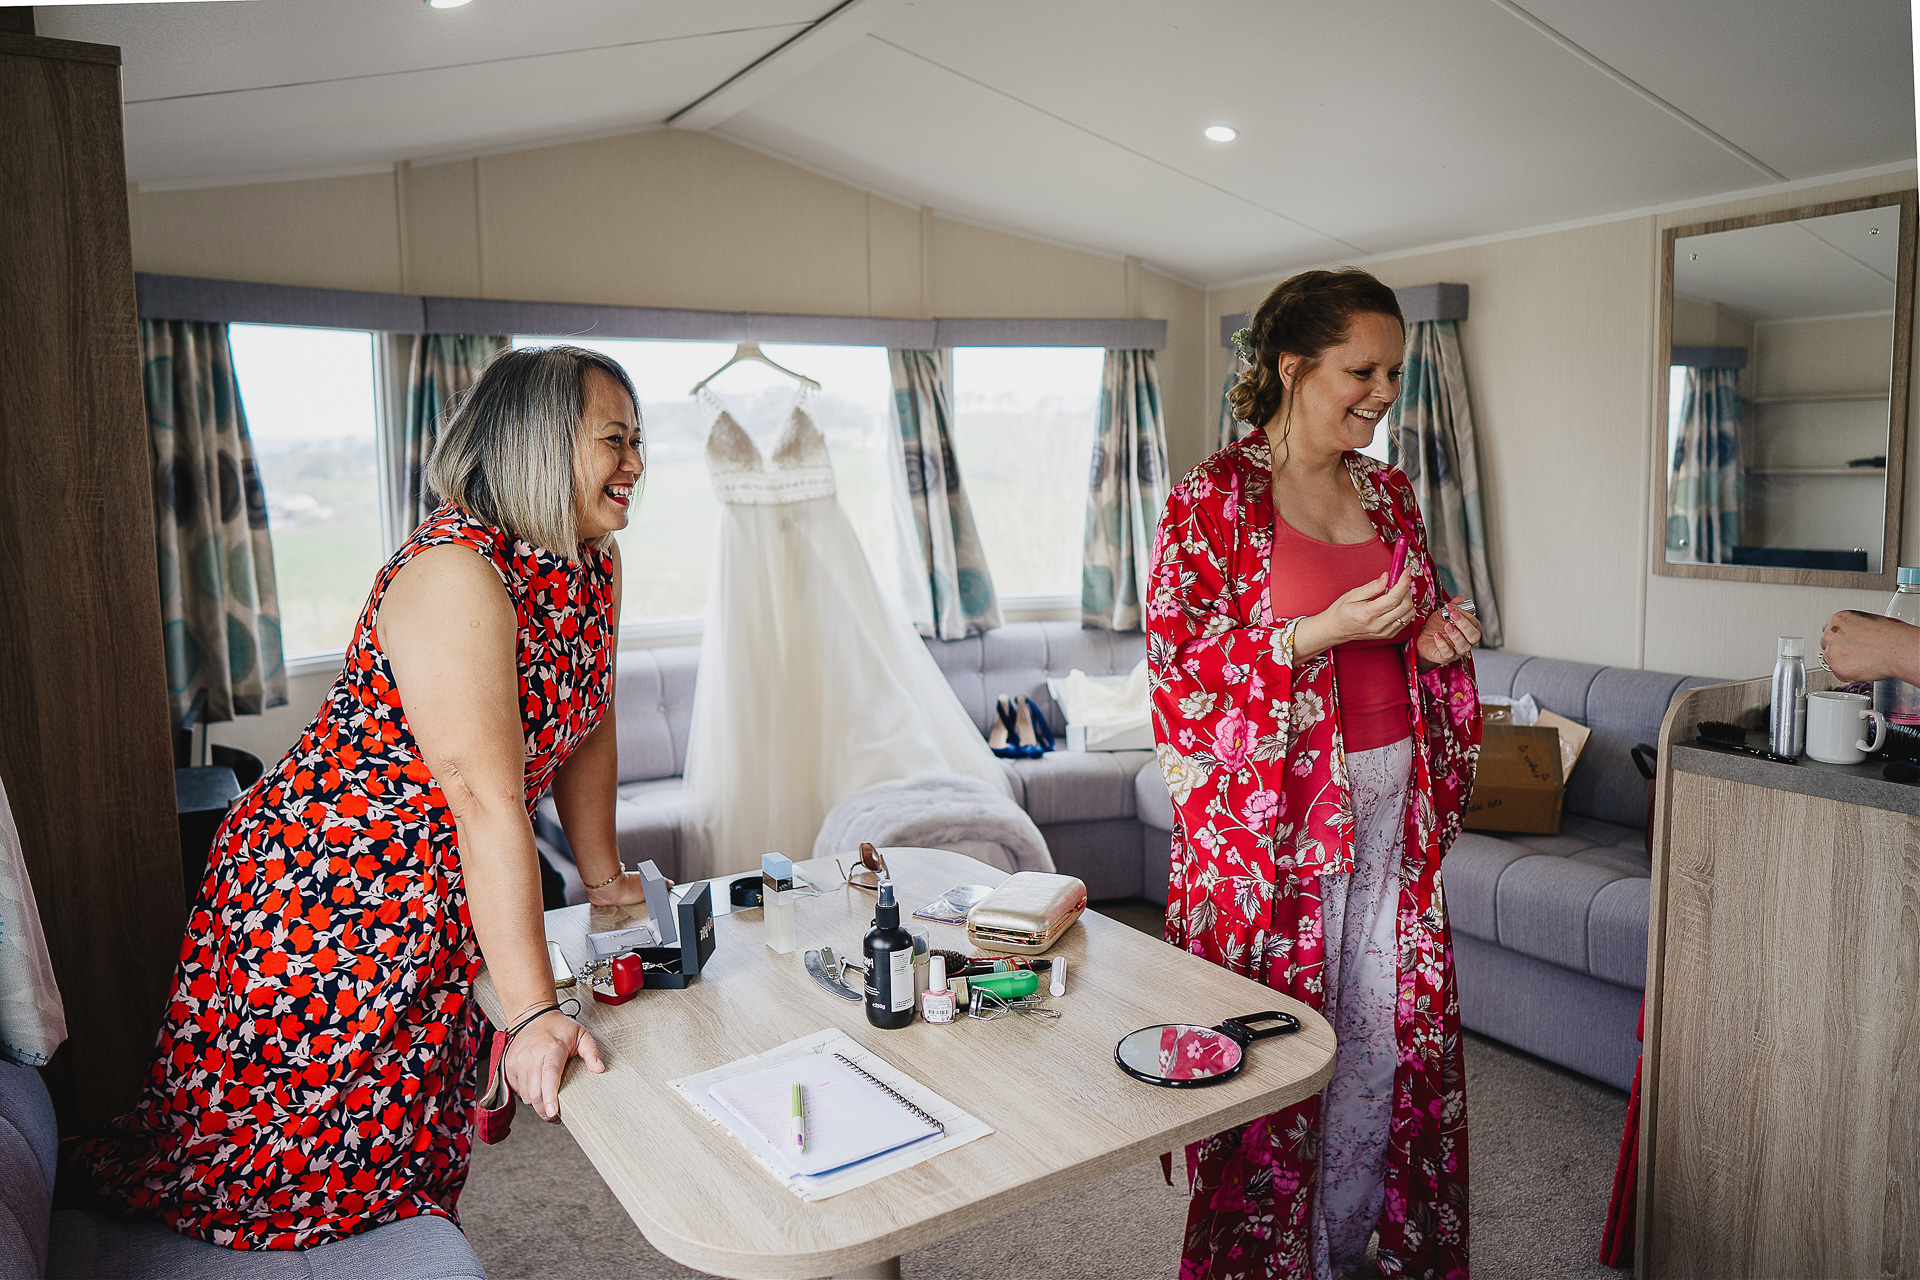 Bride and friend smiling in a caravan with wedding dress hanging behind them